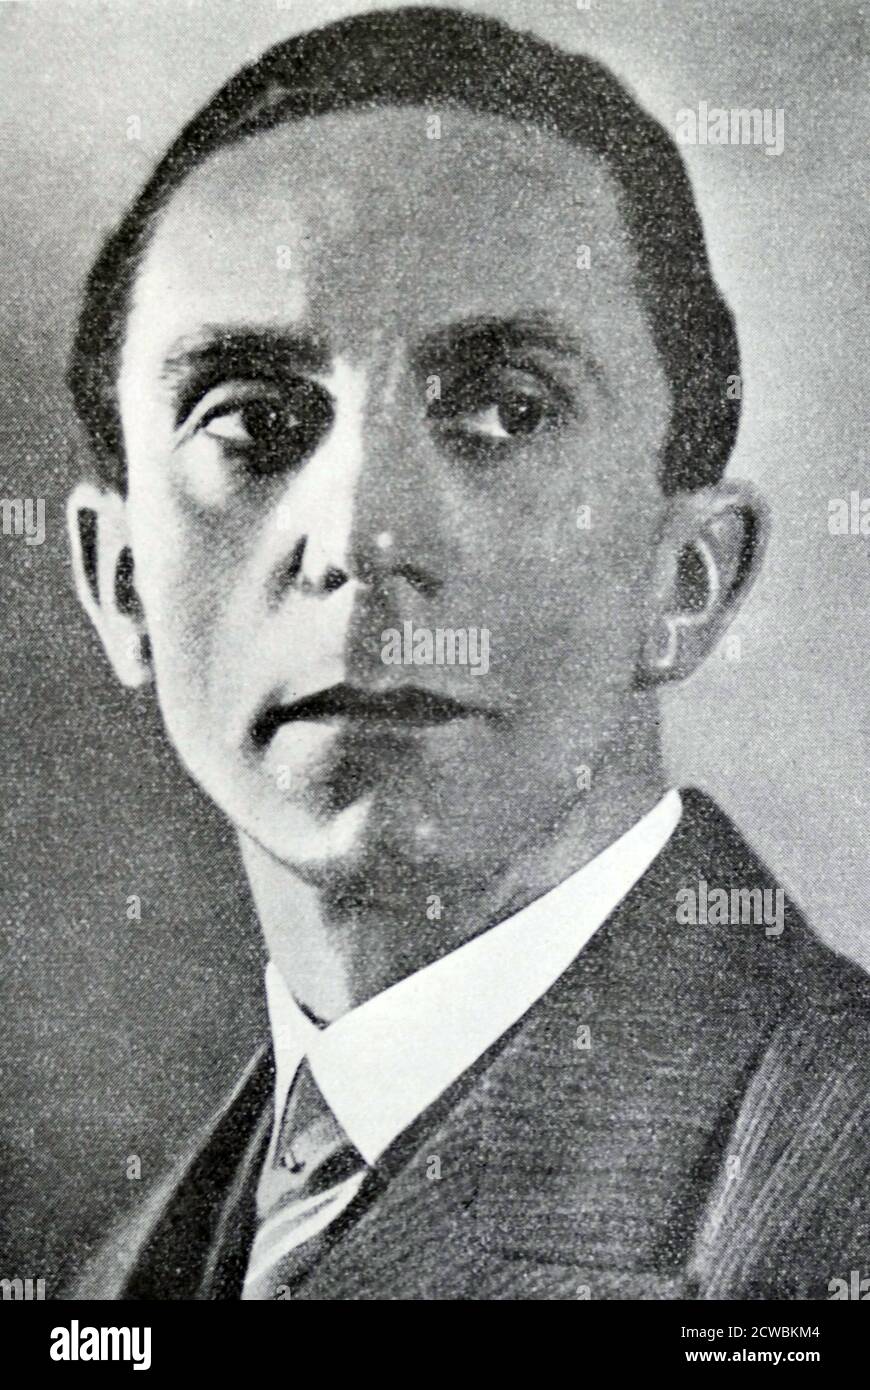 Goebbels 1945 High Resolution Stock Photography and Images - Alamy